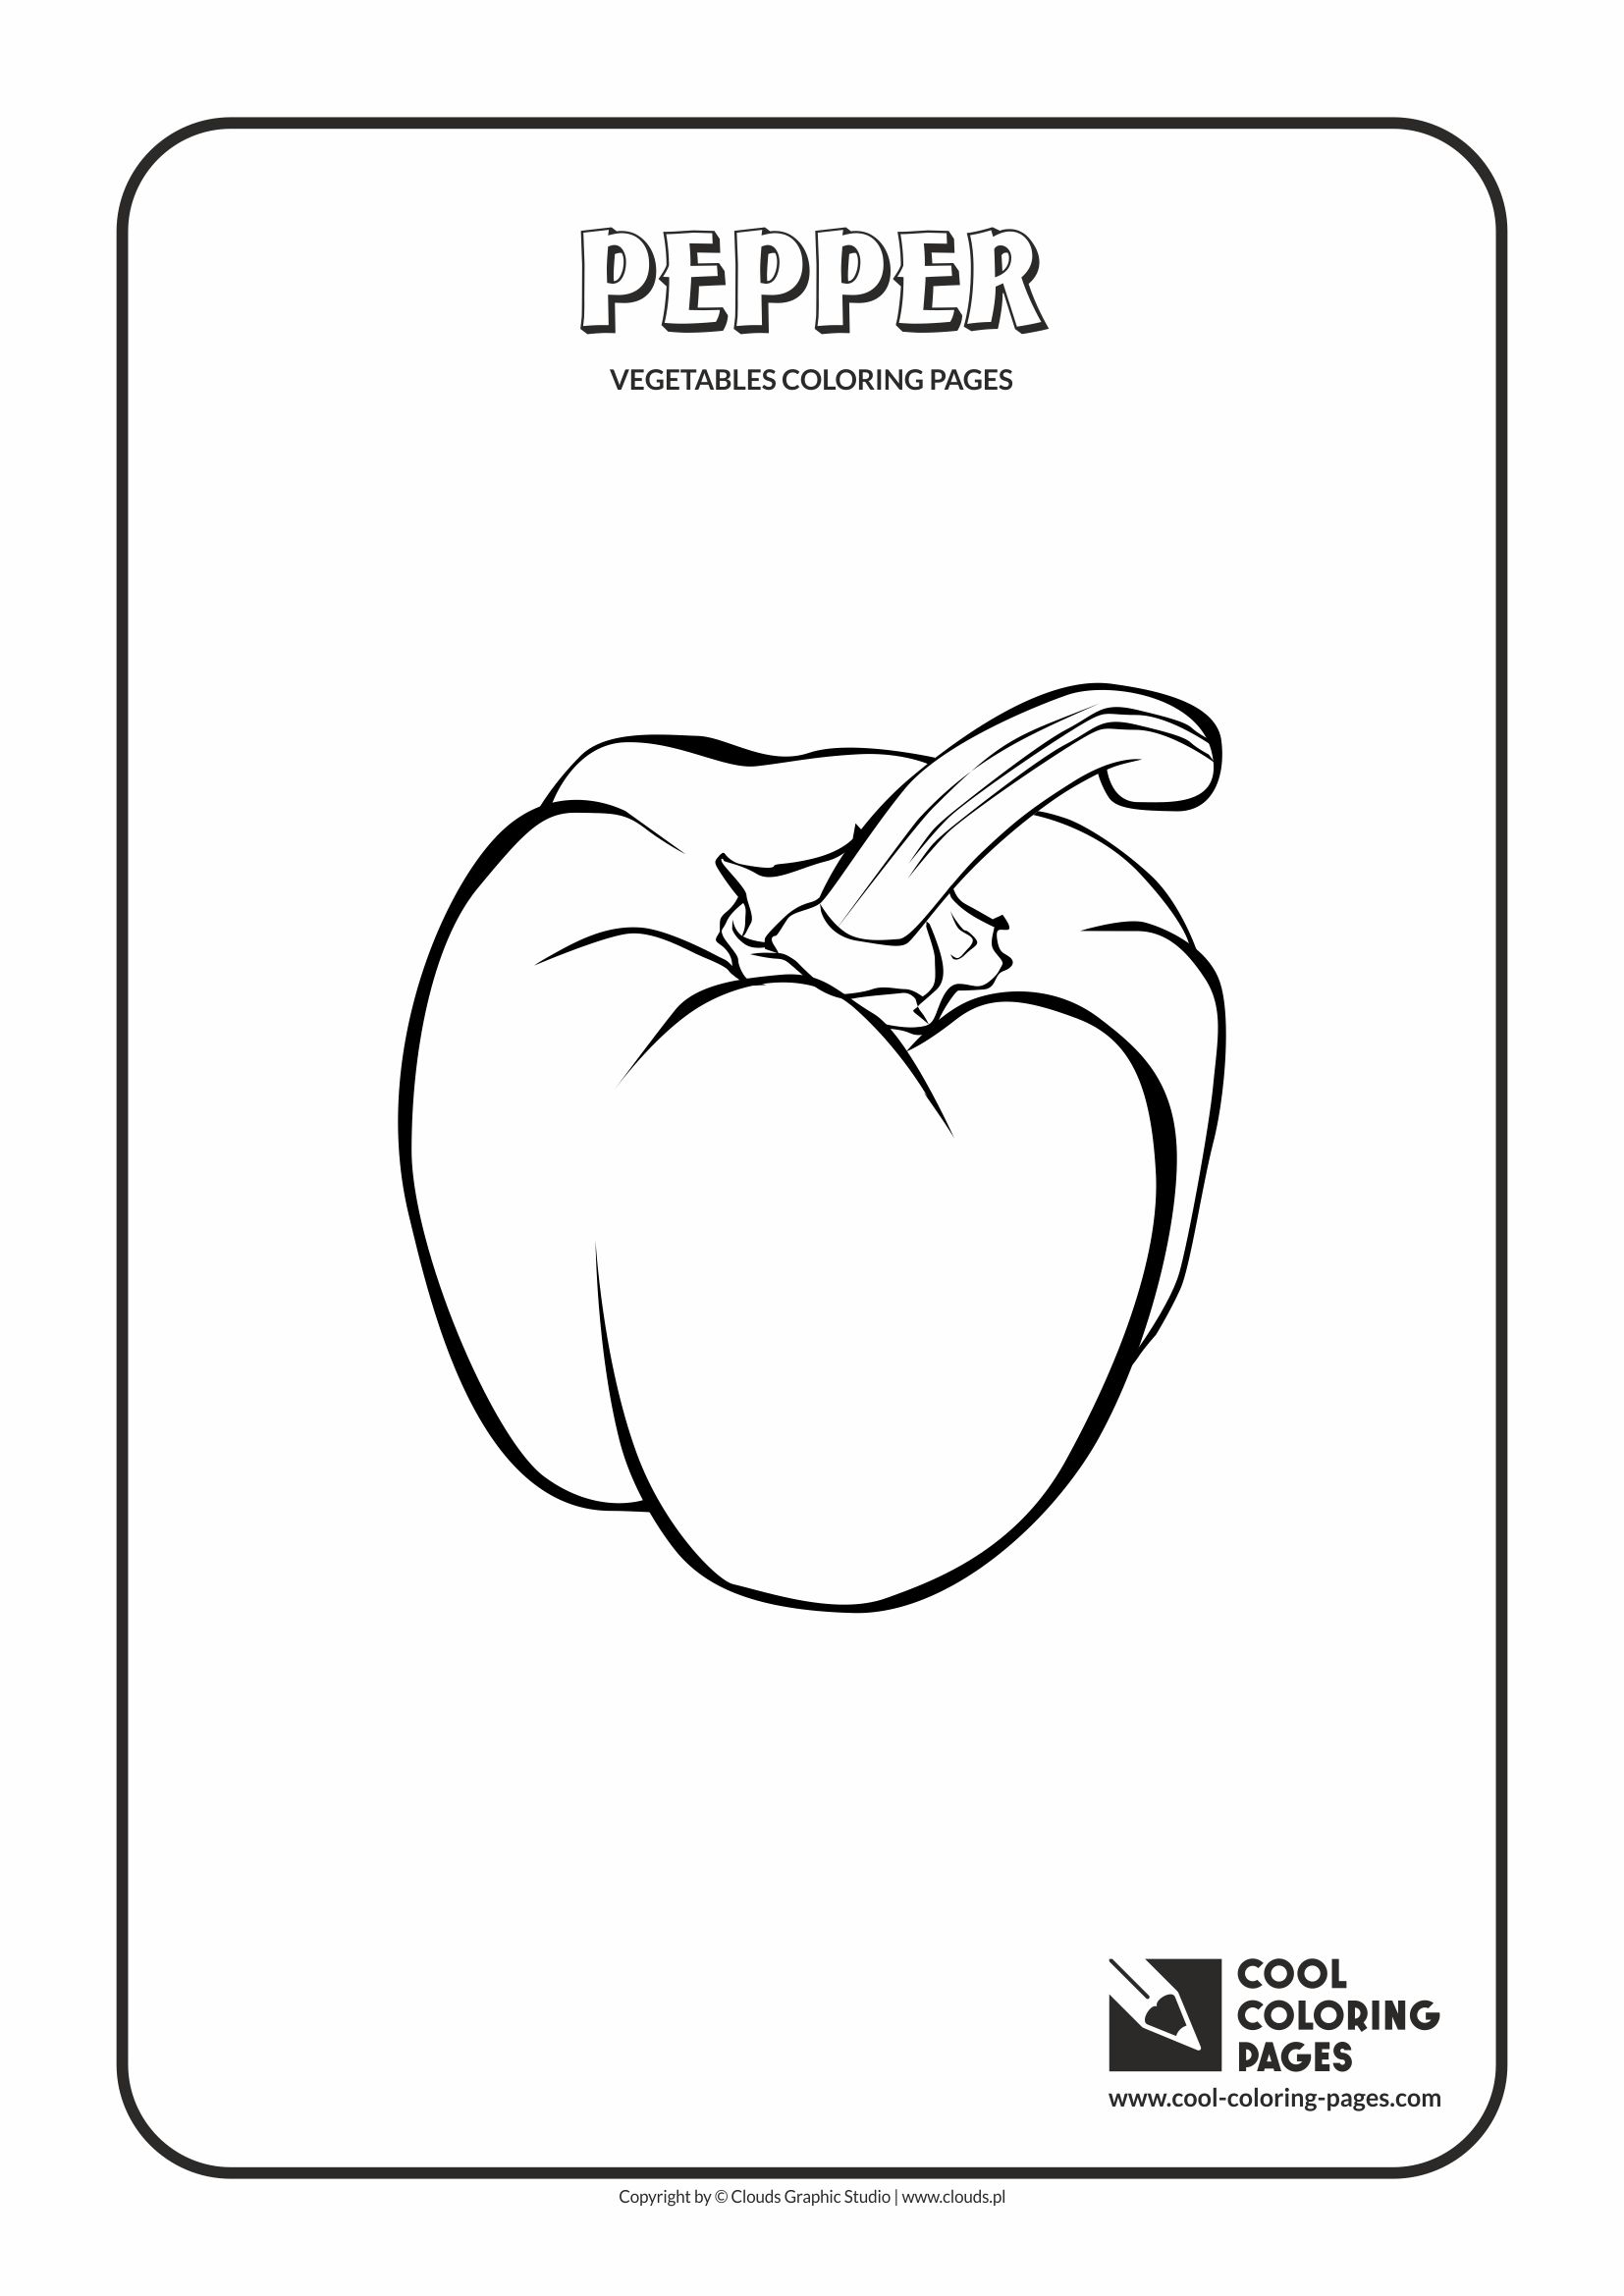 Cool Coloring Pages - Plants / Pepper / Coloring page with pepper